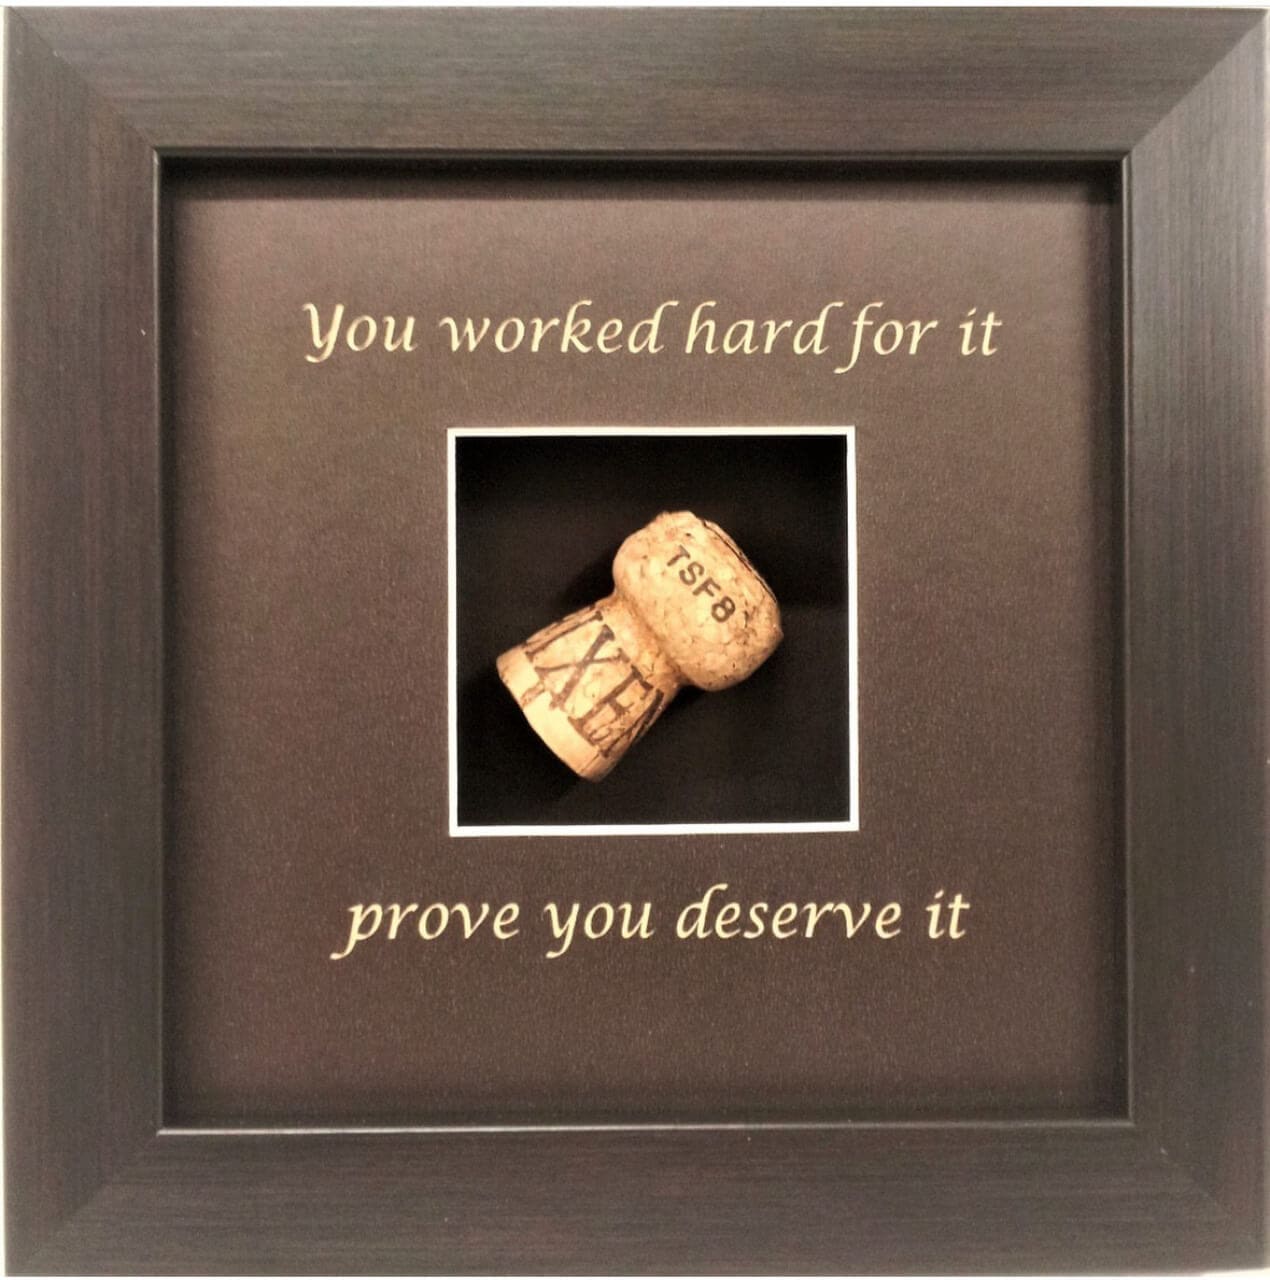 You worked hard for it prove you deserve it framed wine cork.